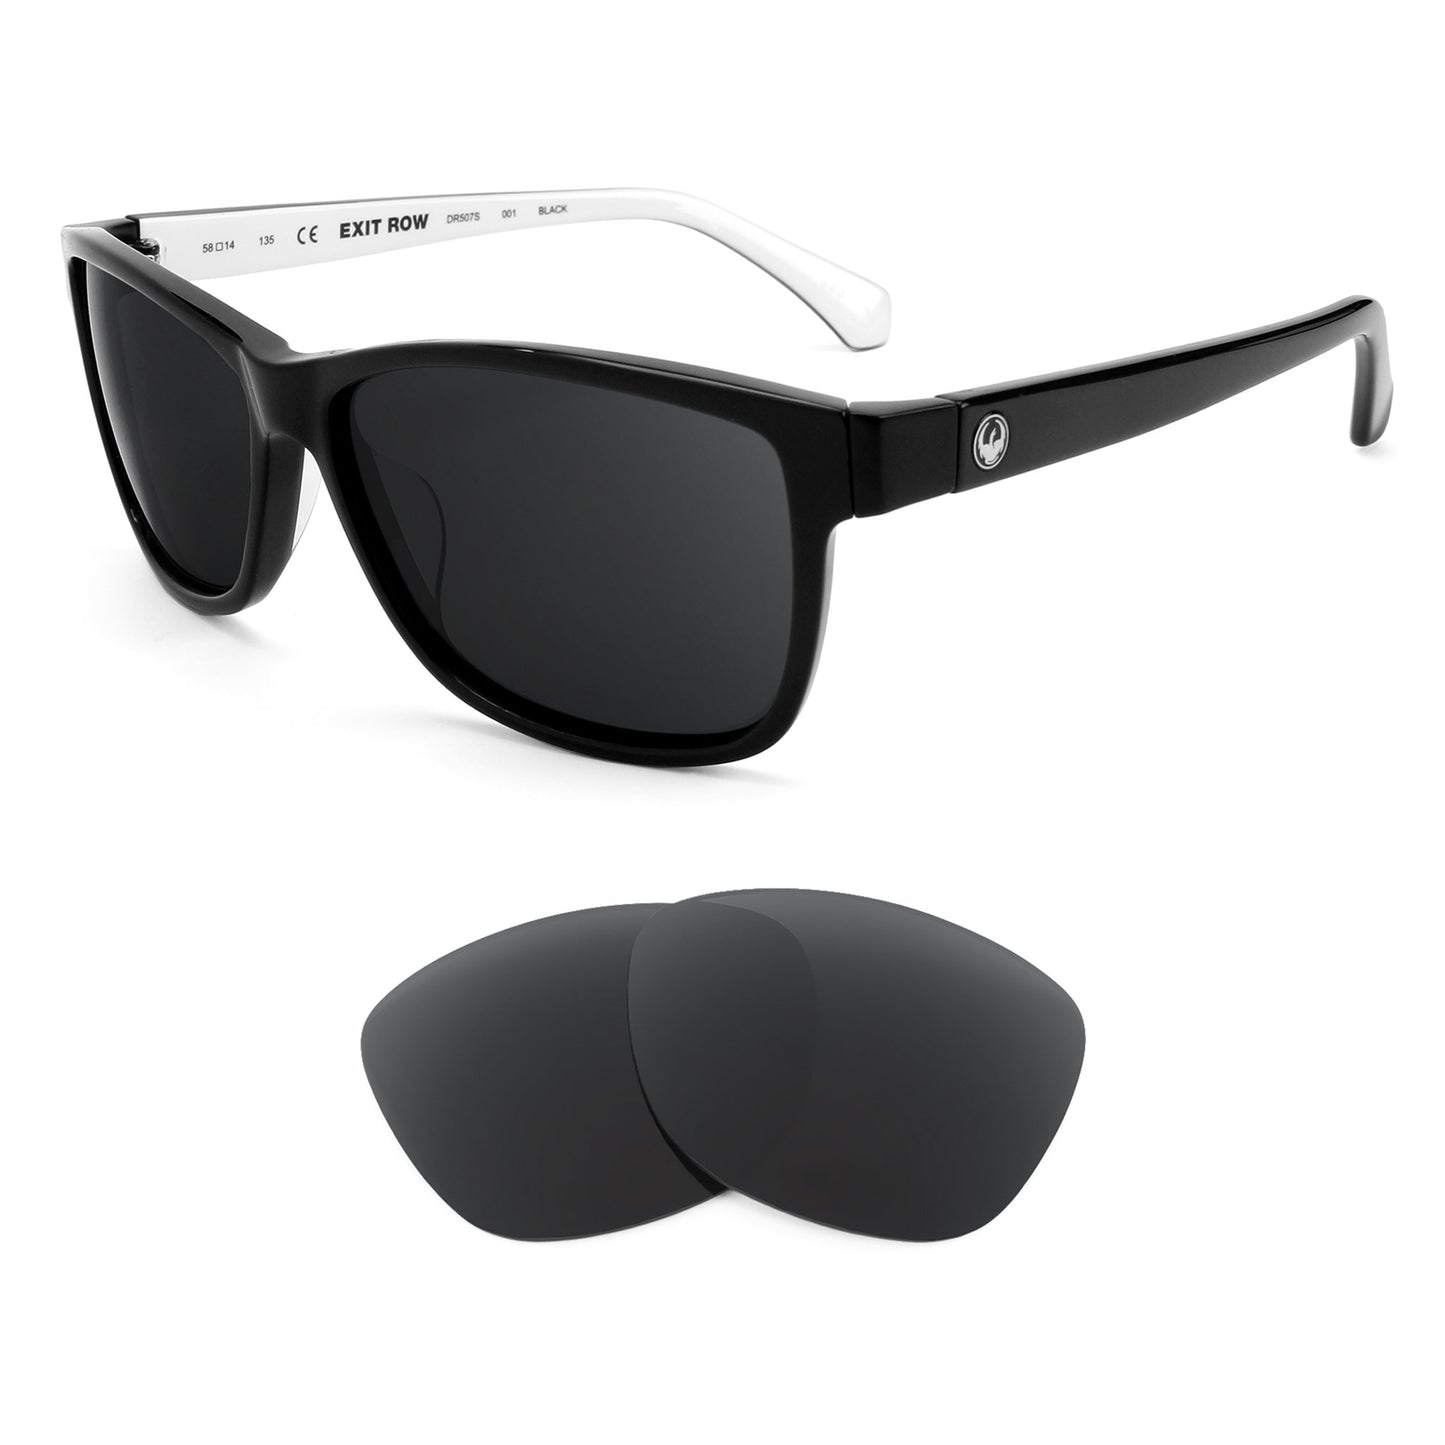 Dragon Exit Row sunglasses with replacement lenses